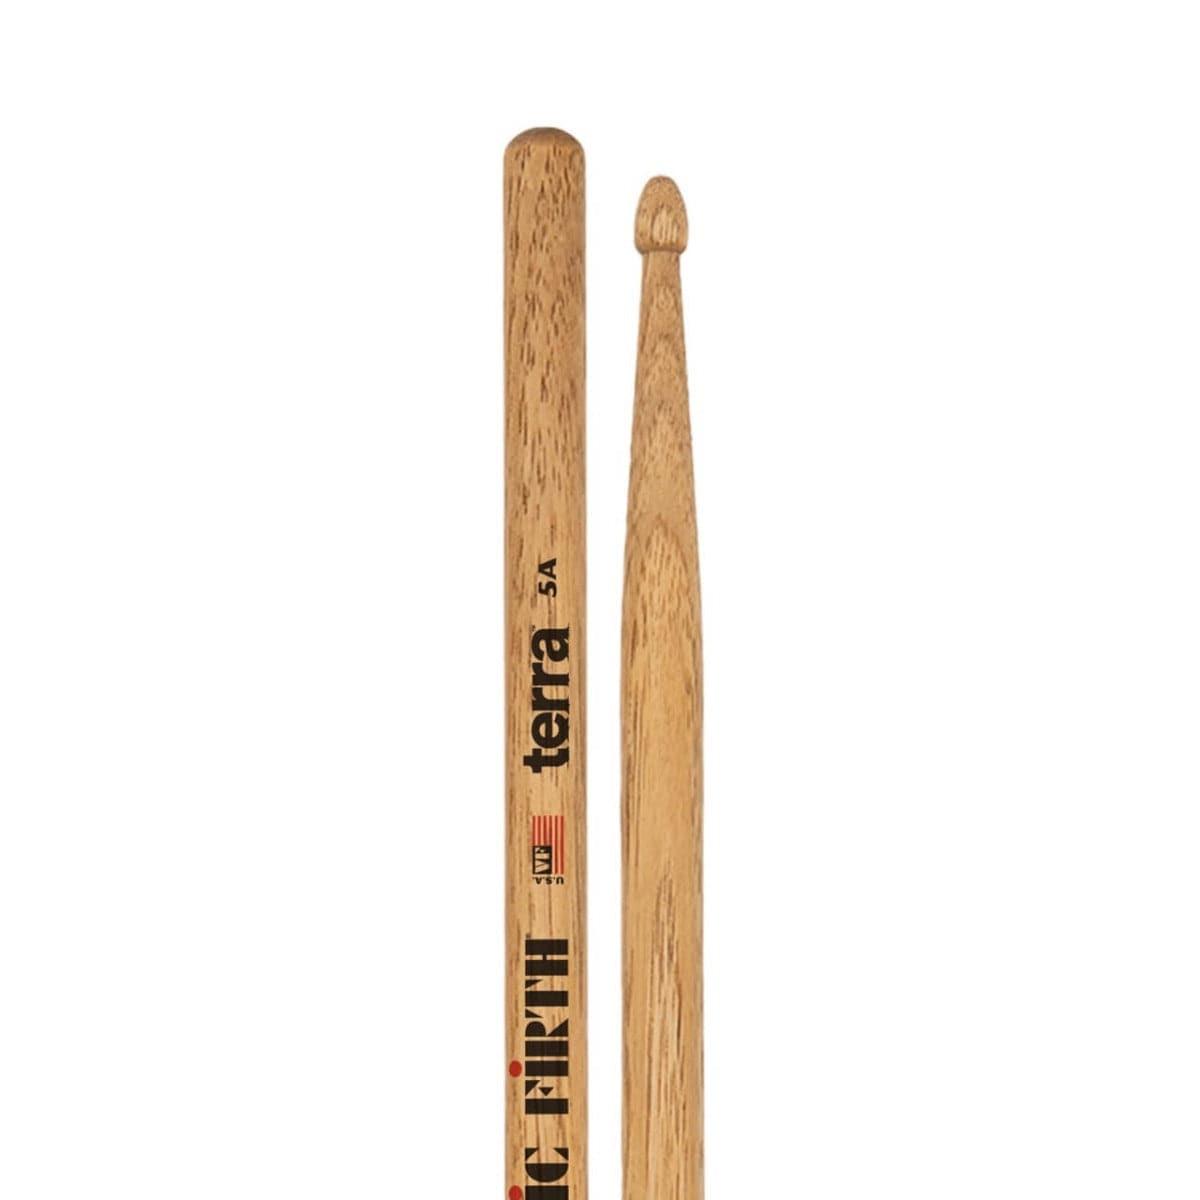 Vic Firth American Classic 5AT Terra Series Drumsticks, 4pr Value Pack